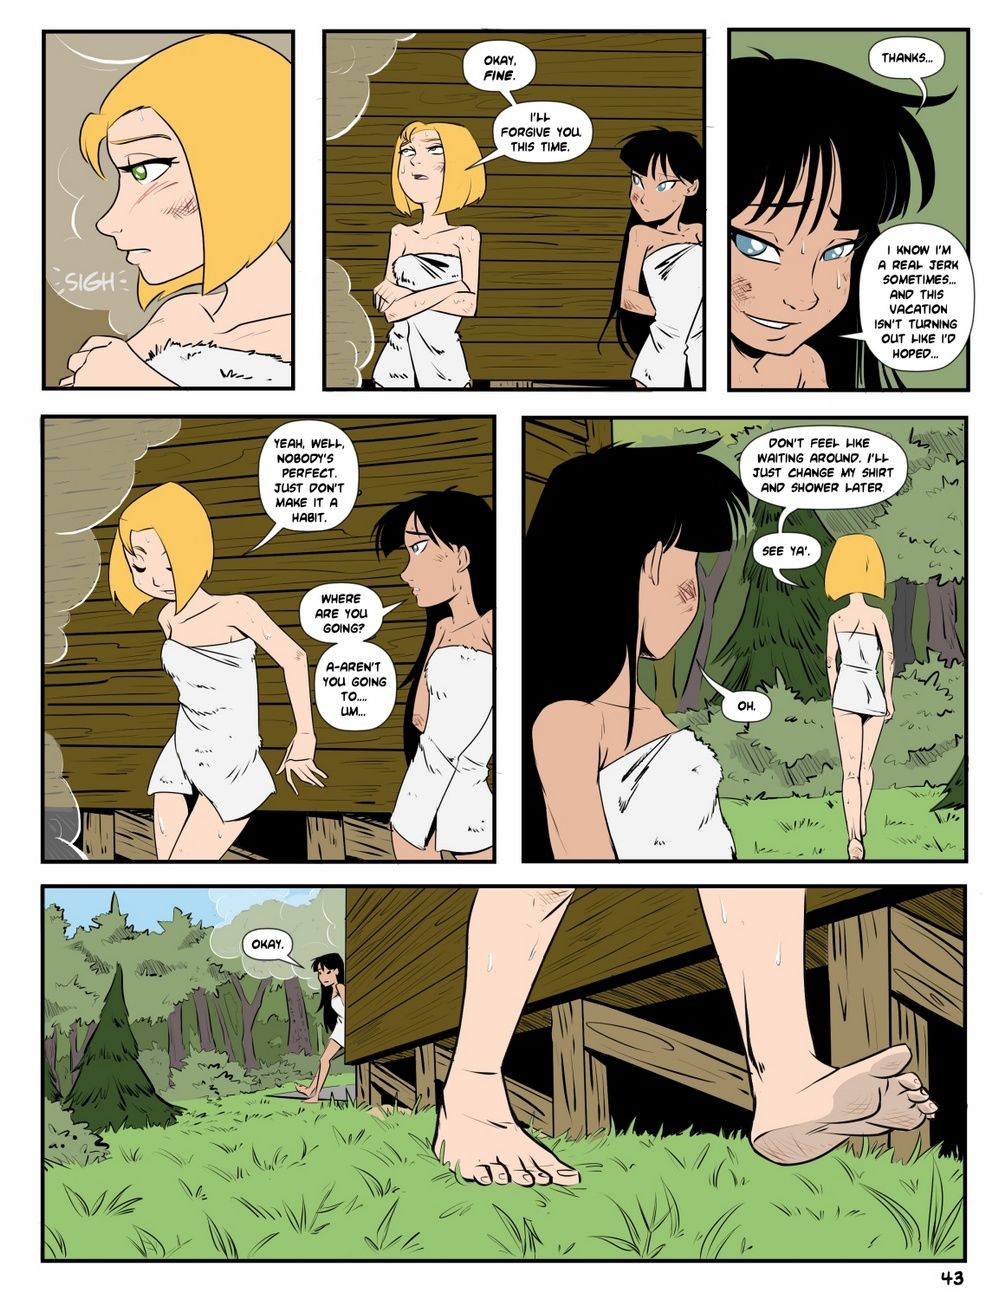 Camp Sherwood [Mr.D] (Ongoing) page 44